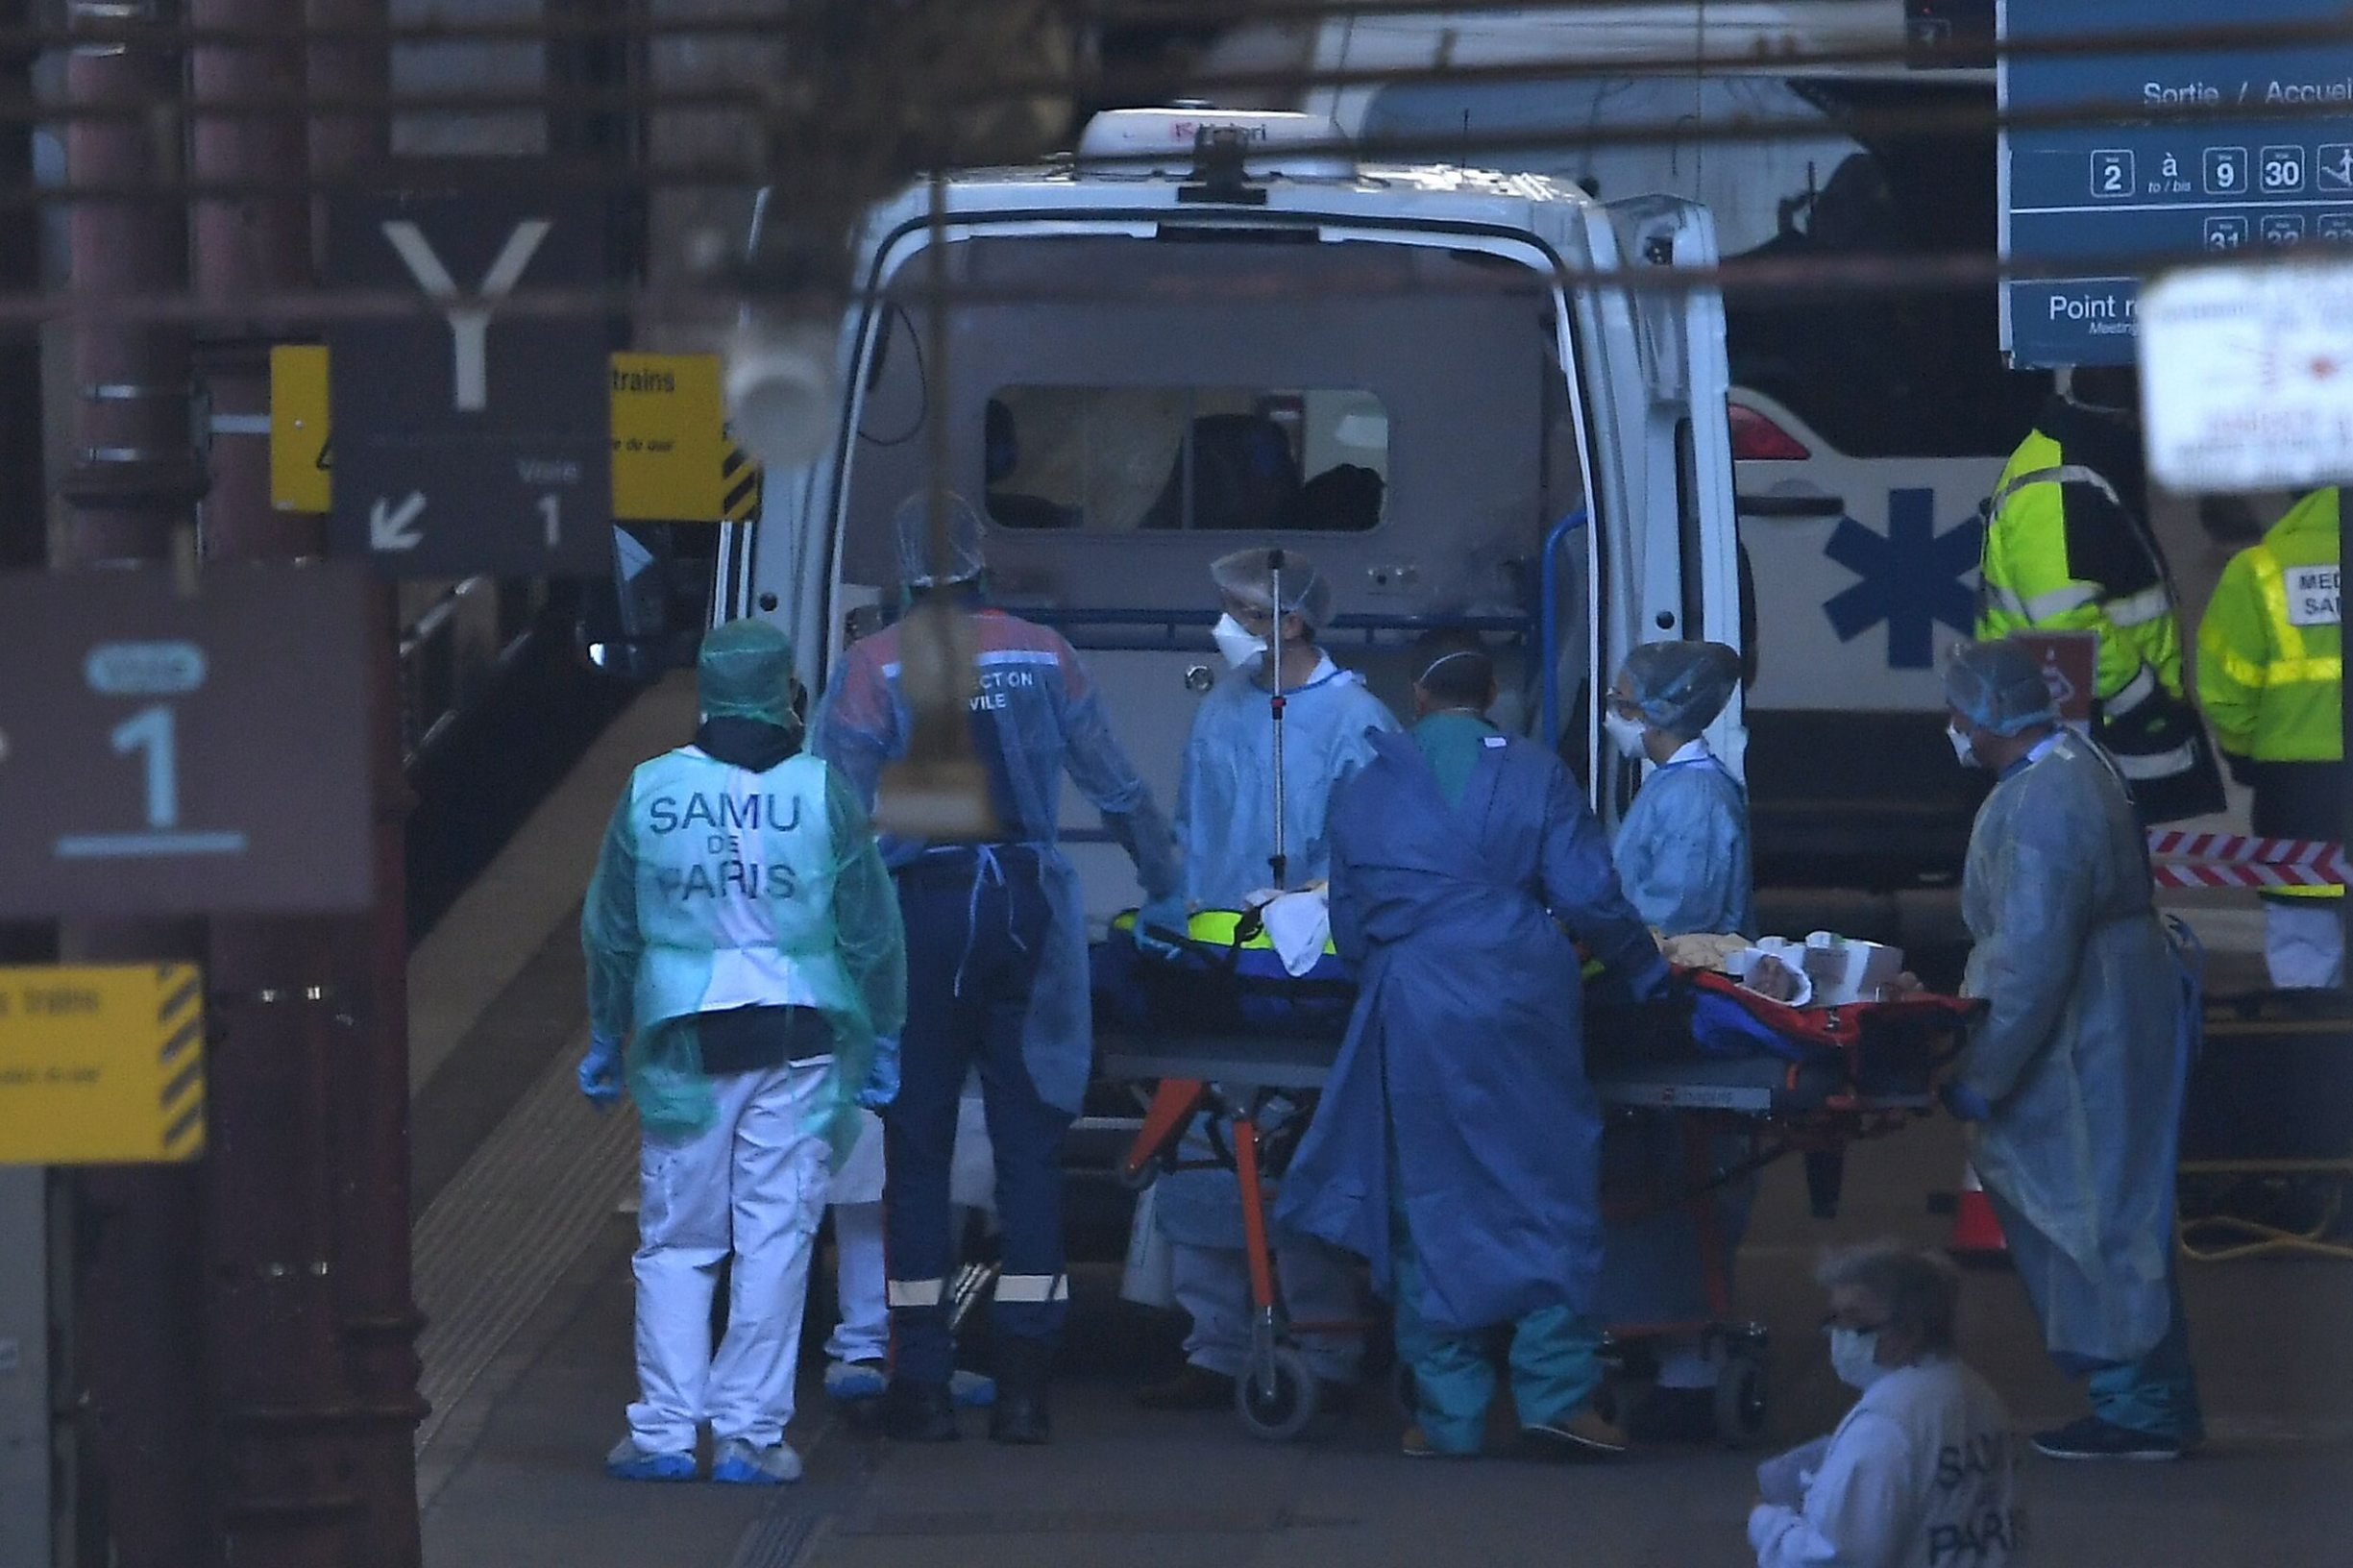 Emergency medical personnel disembark a patient from an ambulance next to a medicalised TGV (high-speed train) in Strasbourg station, eastern France, on March 26, 2020 as 20 patients affected with COVID-19 are evacuated to hospitals in the Pays-de-la-Loire region. - Preparations for the evacuation to hospitals in the Pays-de-la-Loire region of 20 coronavirus-contaminated patients from Alsace aboard a medicalised TGV - an operation unheard of in Europe - began on March 26 morning at Strasbourg station. (Photo by Patrick HERTZOG / AFP)